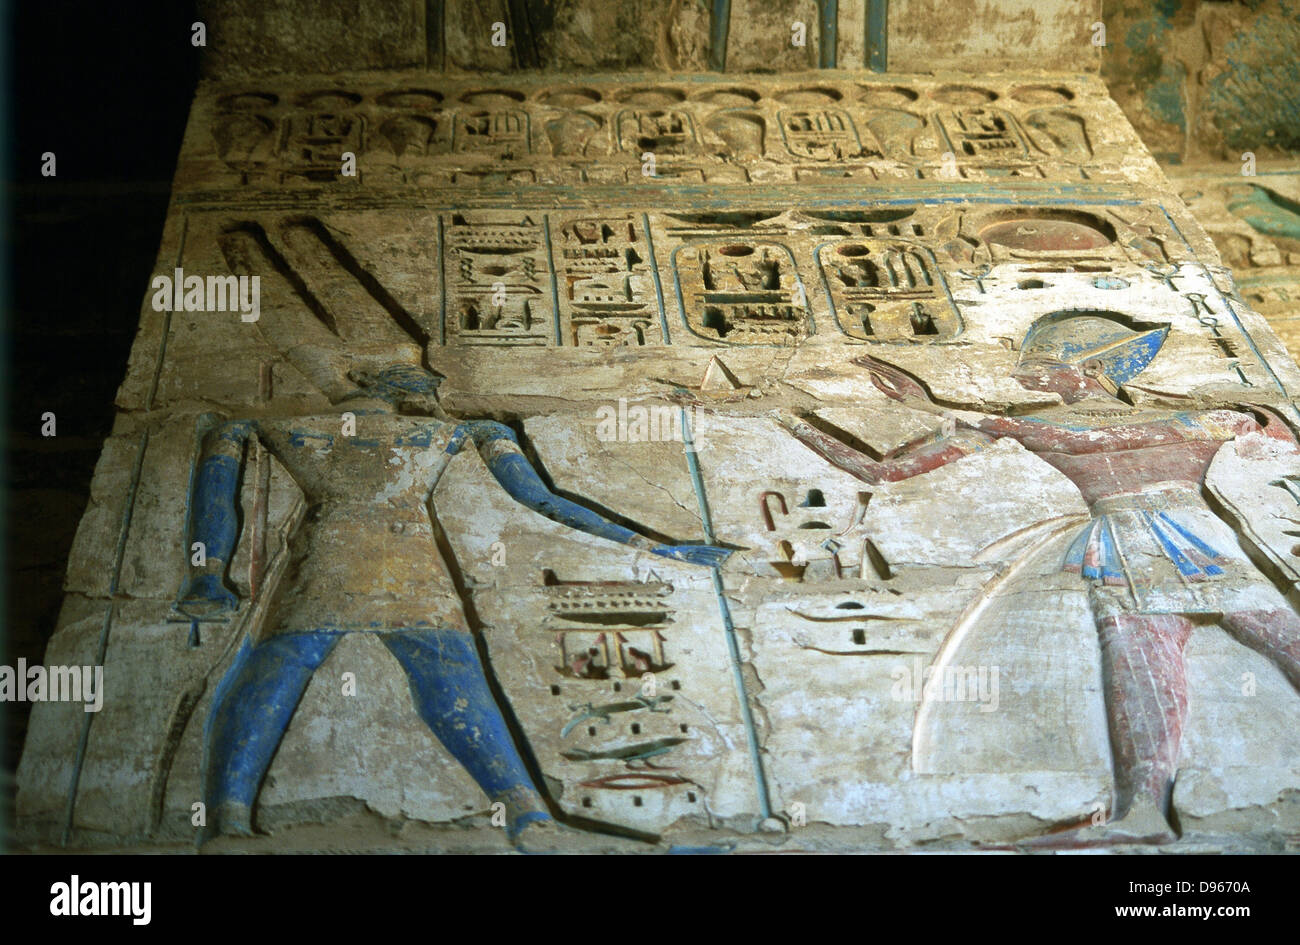 Amon-Ra, Egyptian god, (left) and Rameses III (1198-1167 BC) second king of 20th dynasty. Painted relief, temple of Rameses II, Medinet Habu. Ankh held by Amon-Ra. Empty Eye of Horus bottom centre. Stock Photo